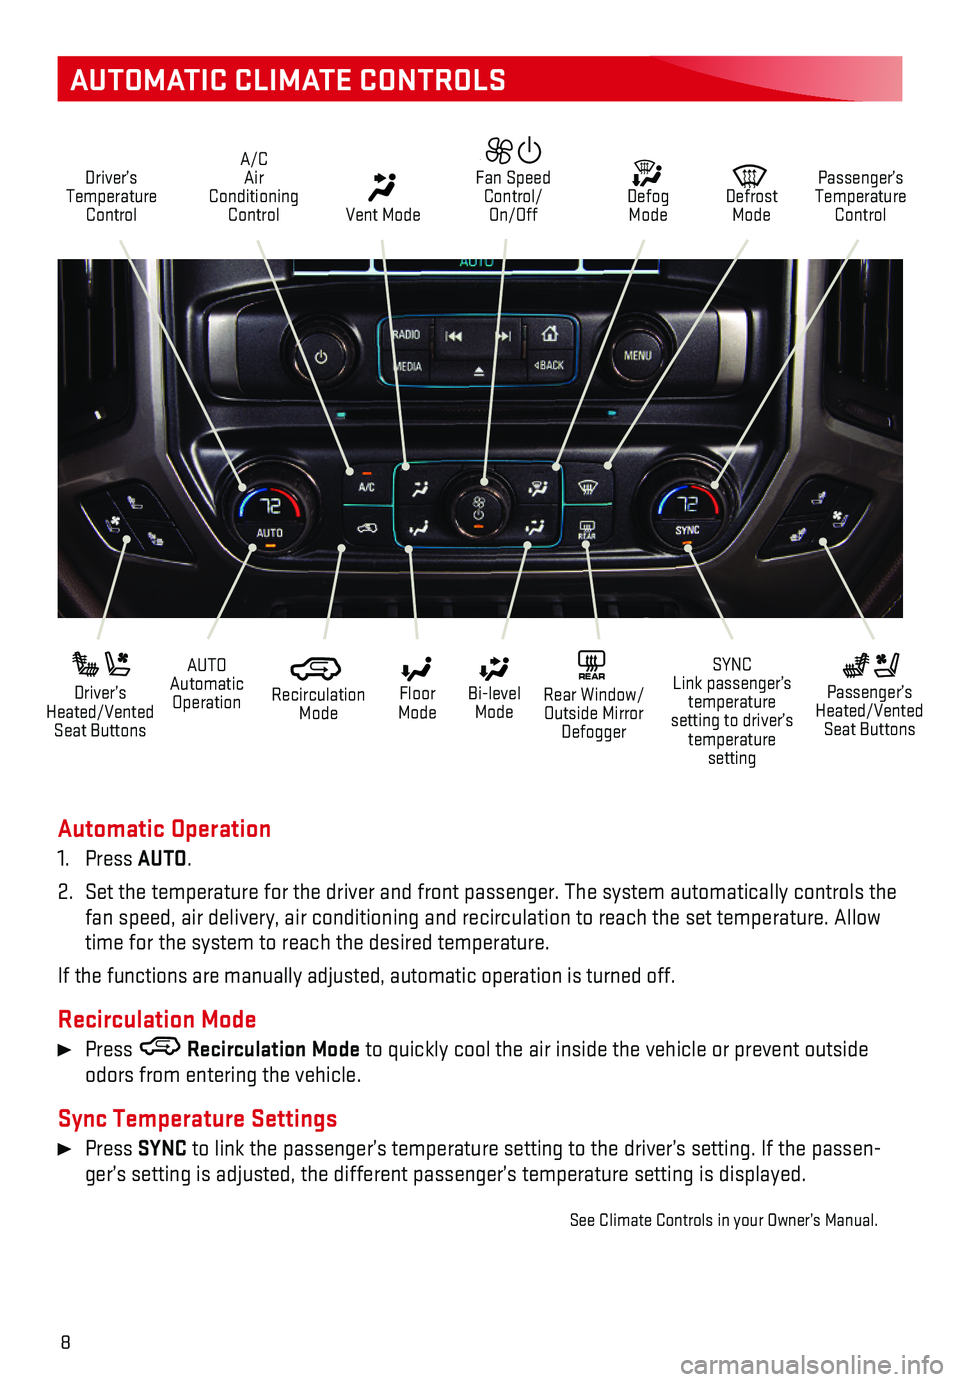 GMC SIERRA 2018  Get To Know Guide 8
AUTOMATIC CLIMATE CONTROLS
Automatic Operation
1. Press AUTO.
2. Set the temperature for the driver and front passenger. The system autom\atically   controls the fan speed, air delivery, air condit